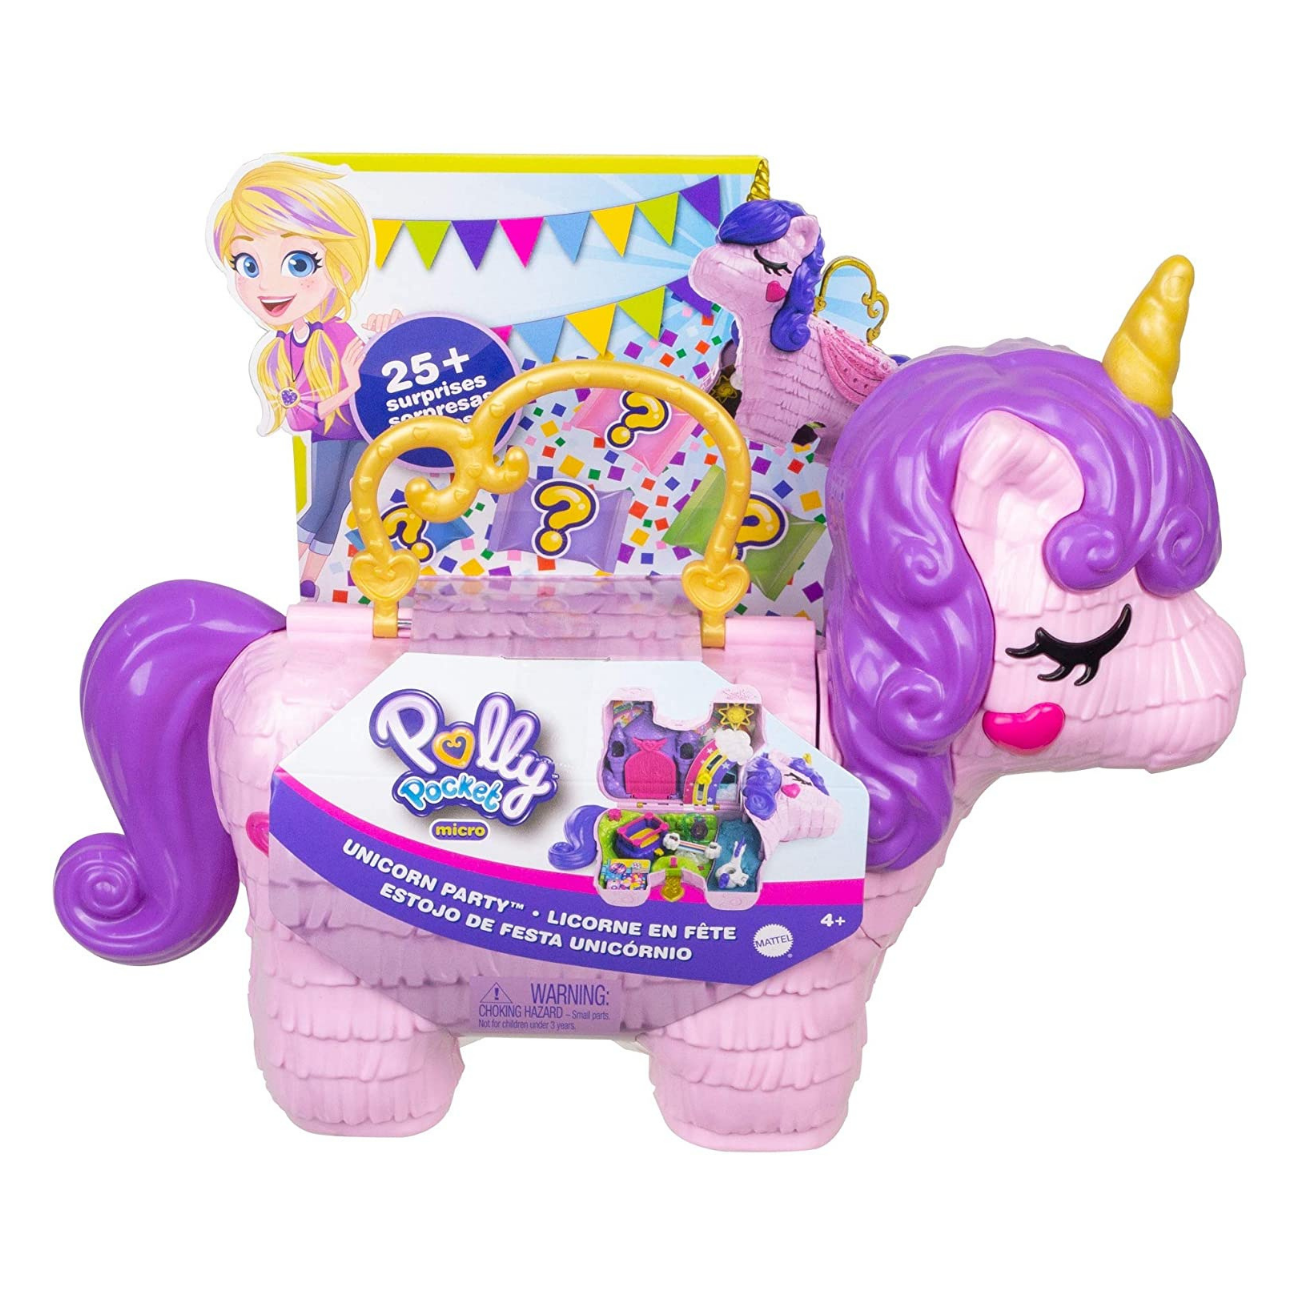 Polly Pocket and Friends Different Fashion Accessories Play Sets